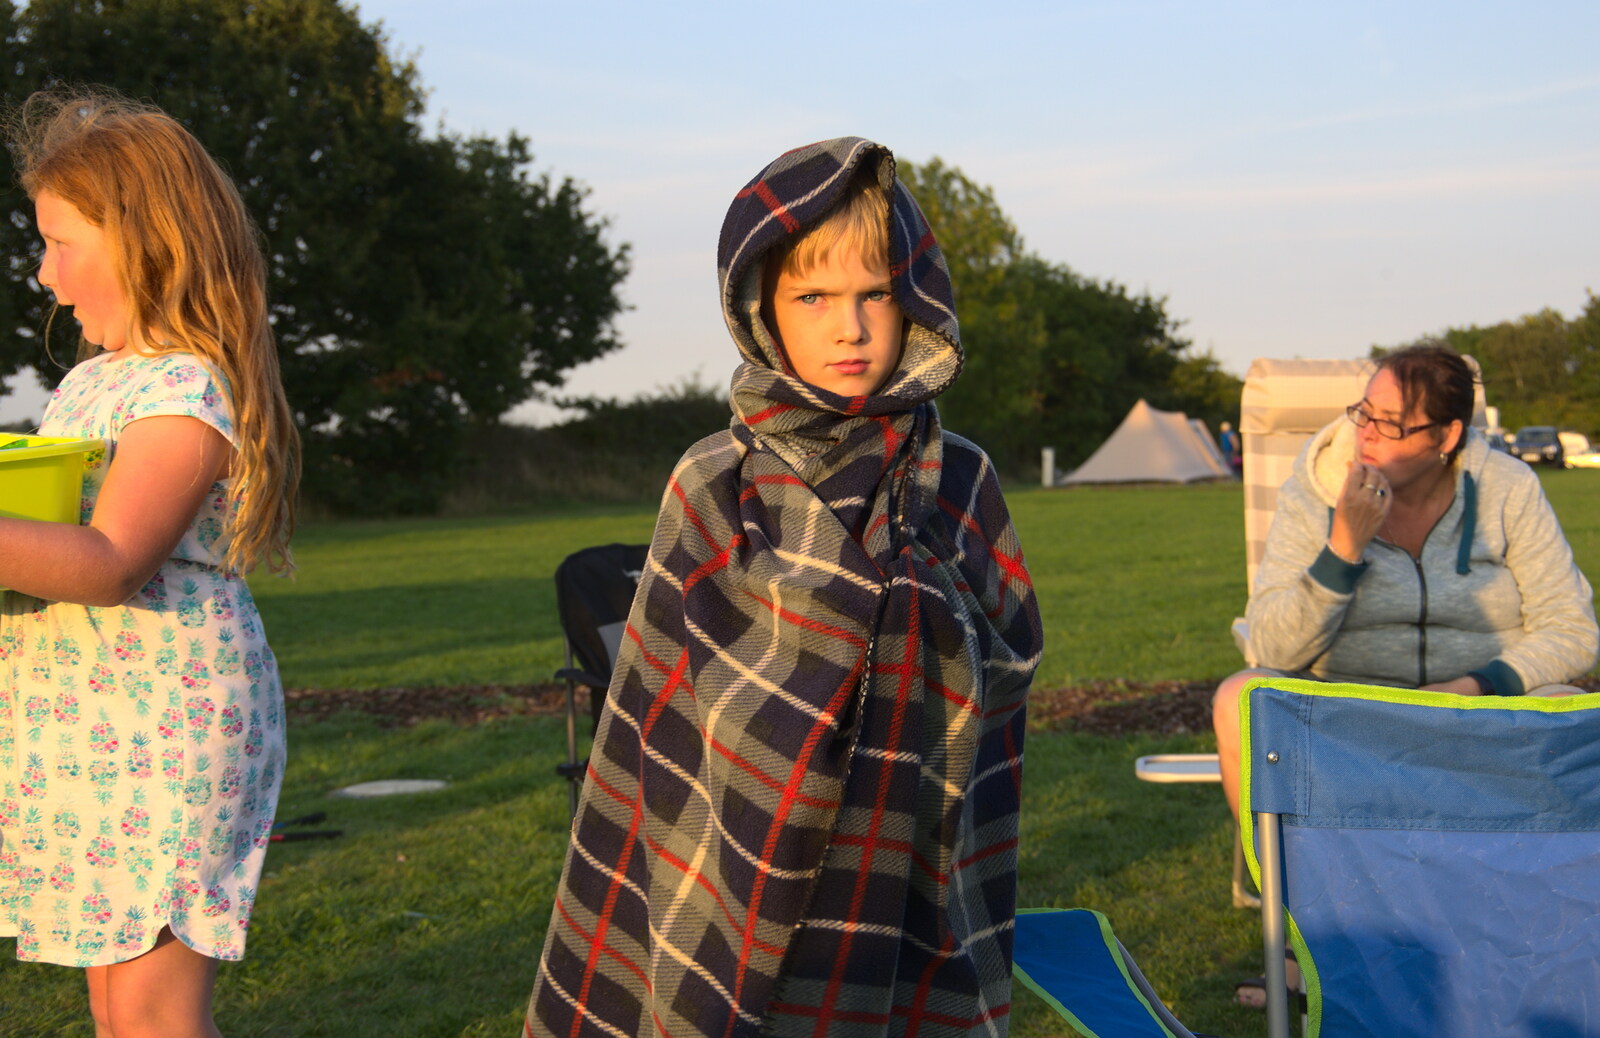 Harry looks like some kind of tartan Bedouin from A Spot of Camping, Alton Water, Stutton, Suffolk - 1st September 2018